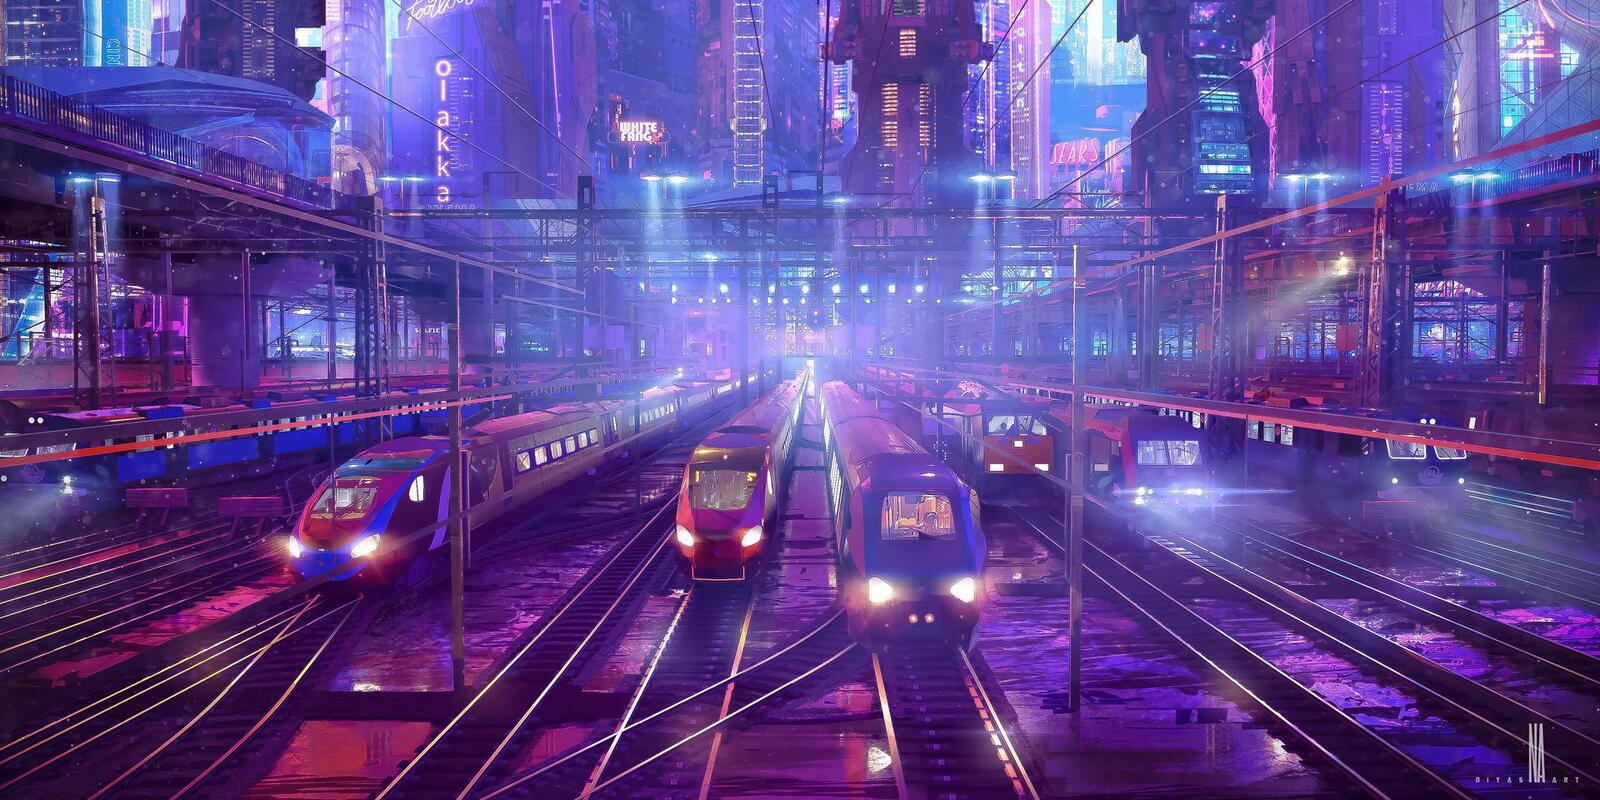 Wallpapers train evening city on the desktop